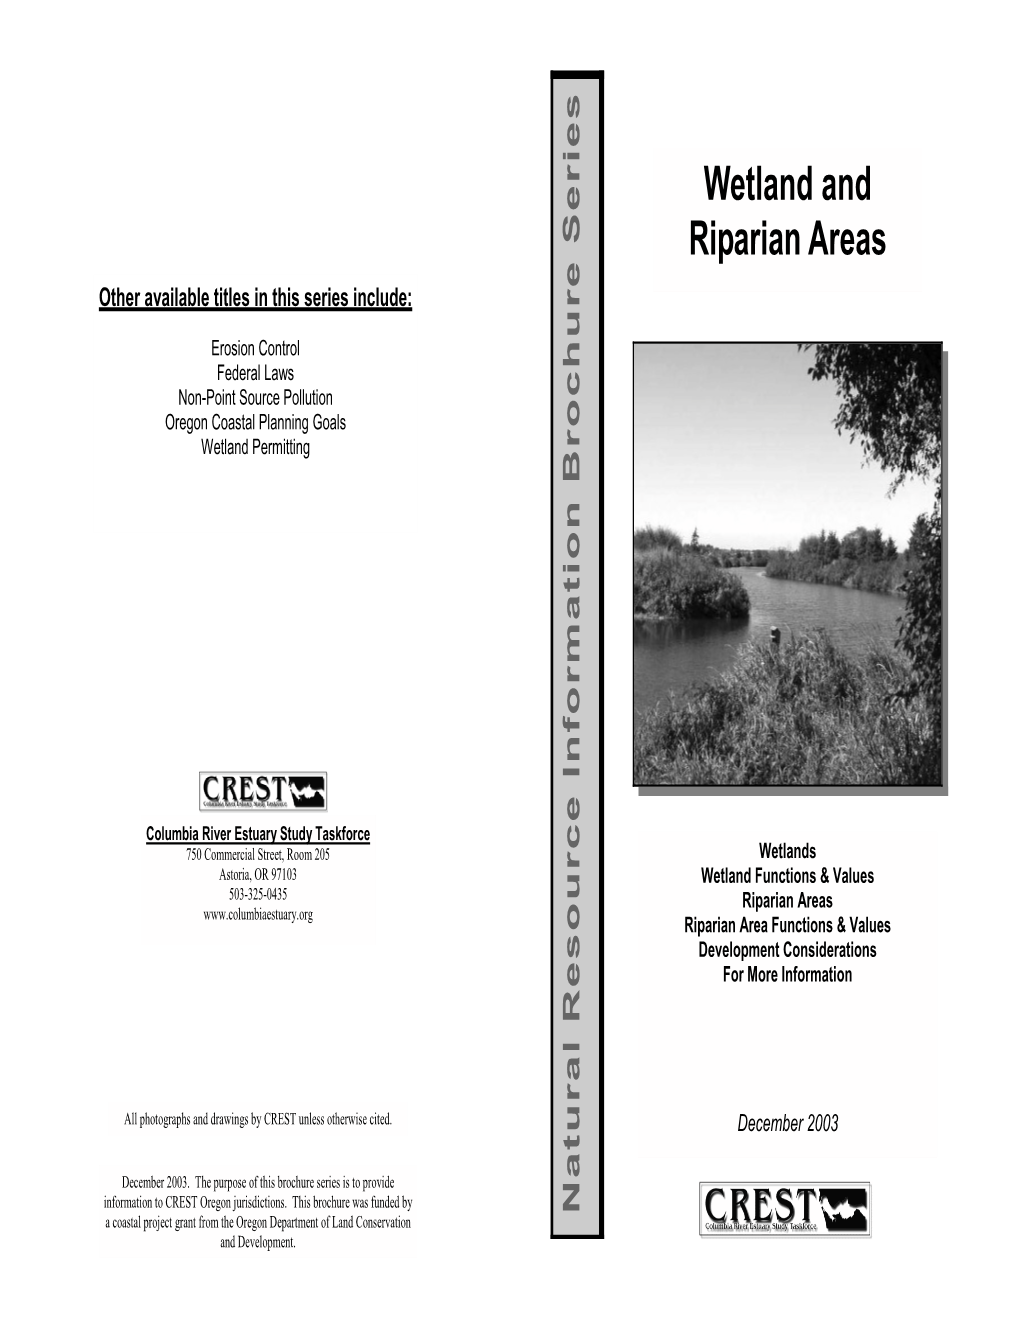 Wetland and Riparian Areas Other Available Titles in This Series Include